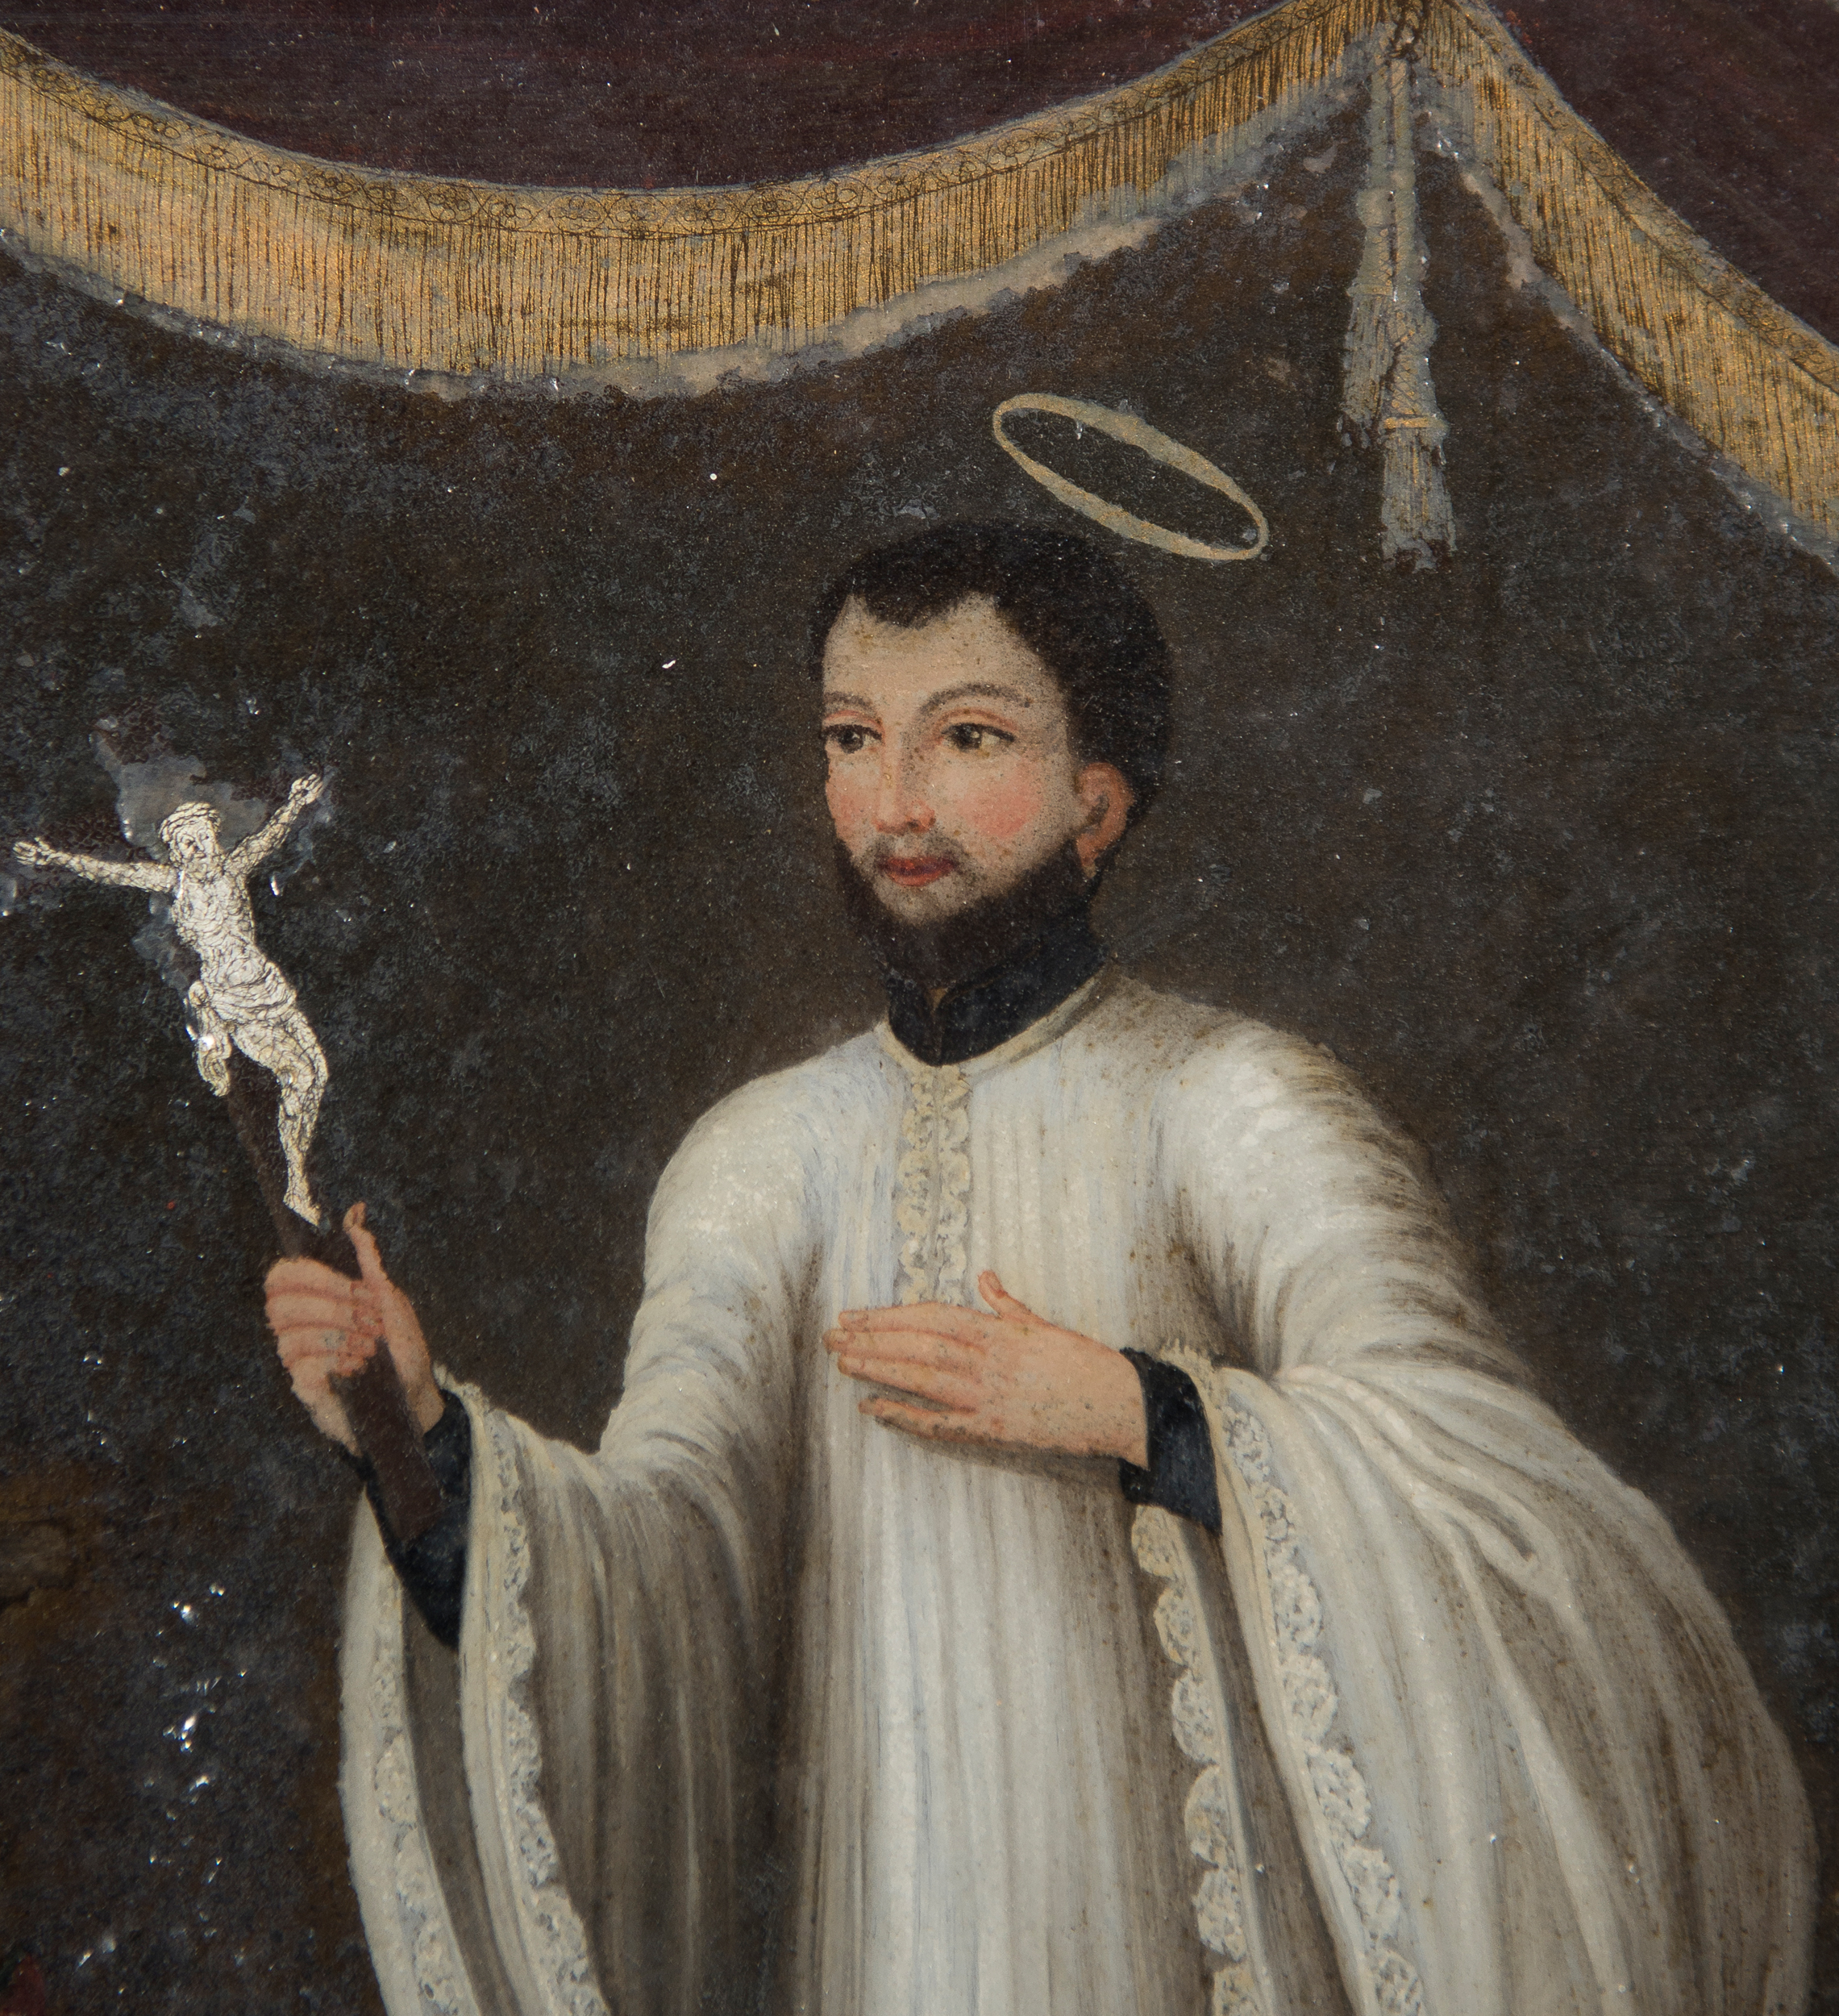 "Saint Francis Xavier". Reverse glass. Canton. China. Quing Dynasty. Late 18th century. - Image 2 of 5